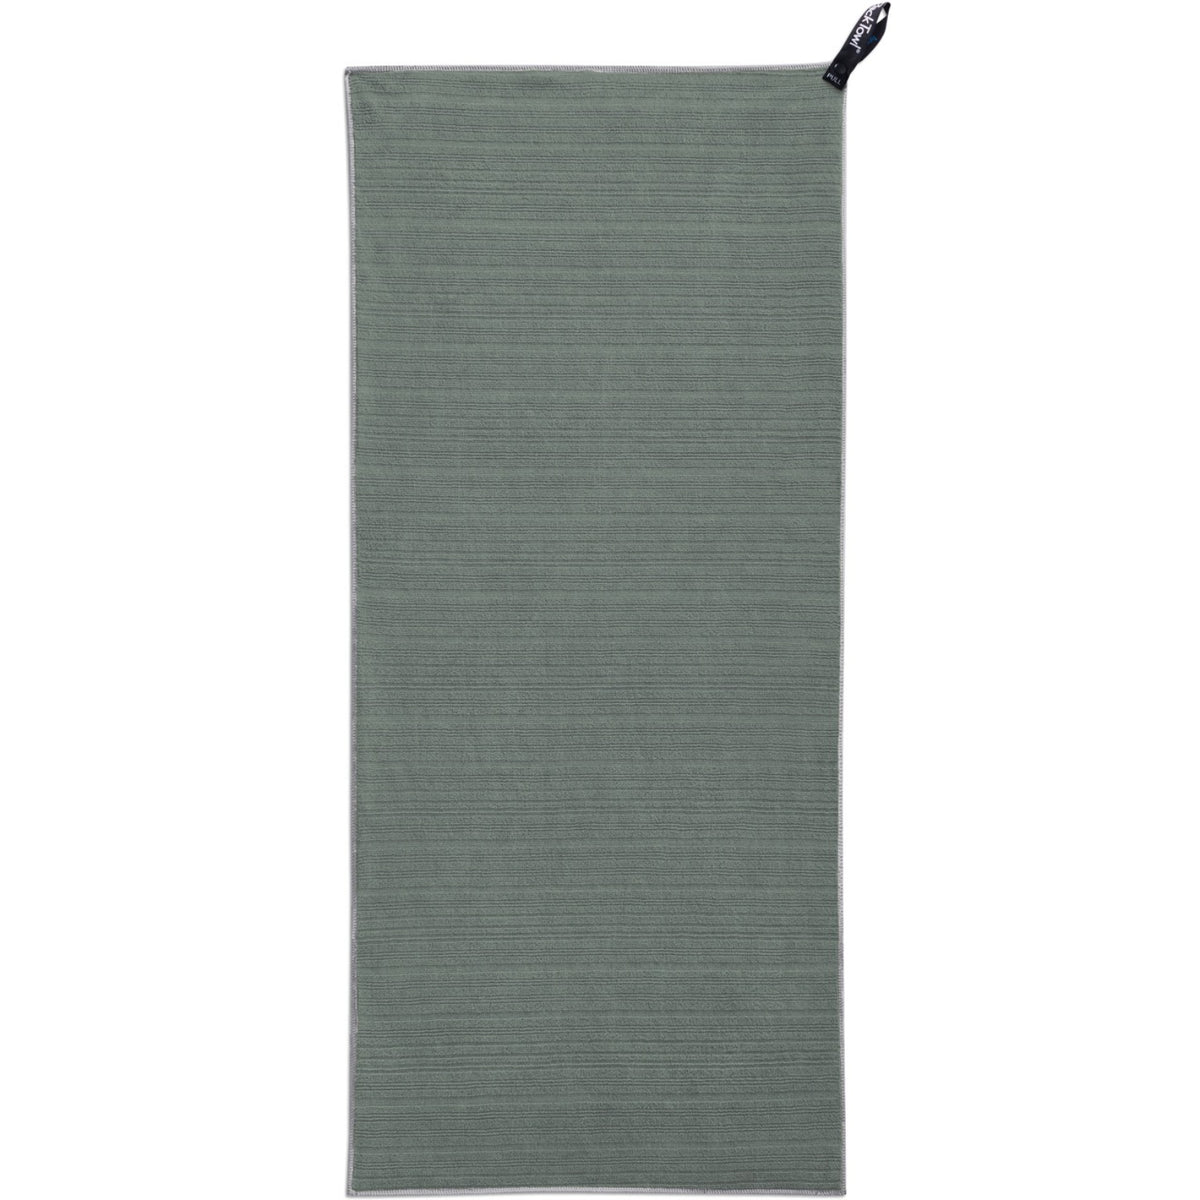 PackTowl Luxe Towel - Hand in sage